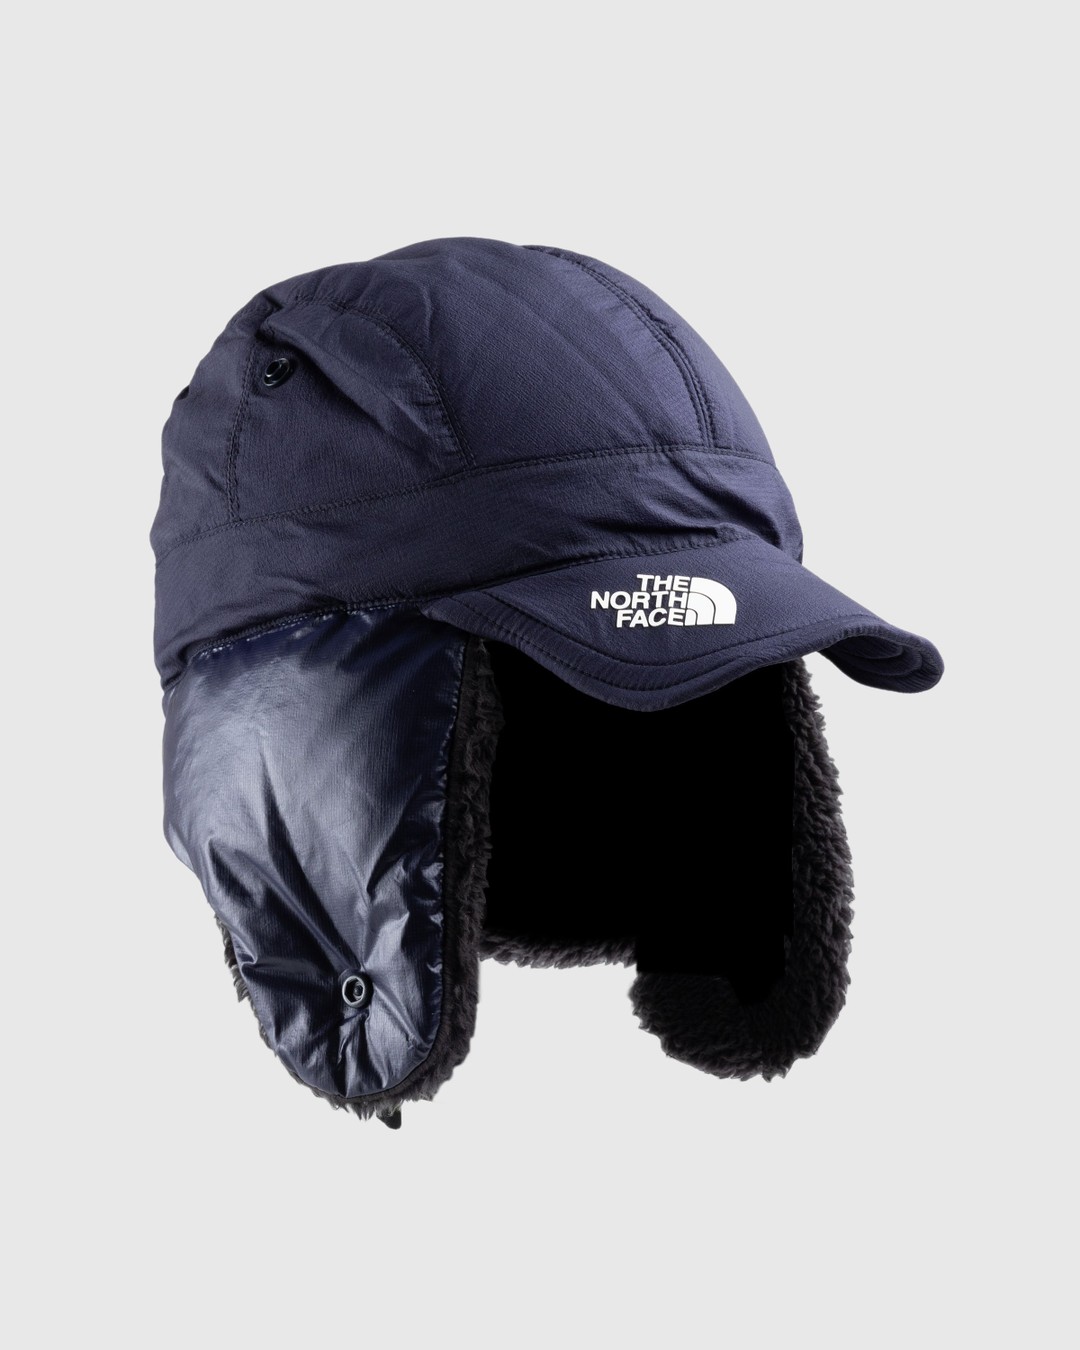 The North Face x UNDERCOVER – Soukuu Down Cap Black/Navy 